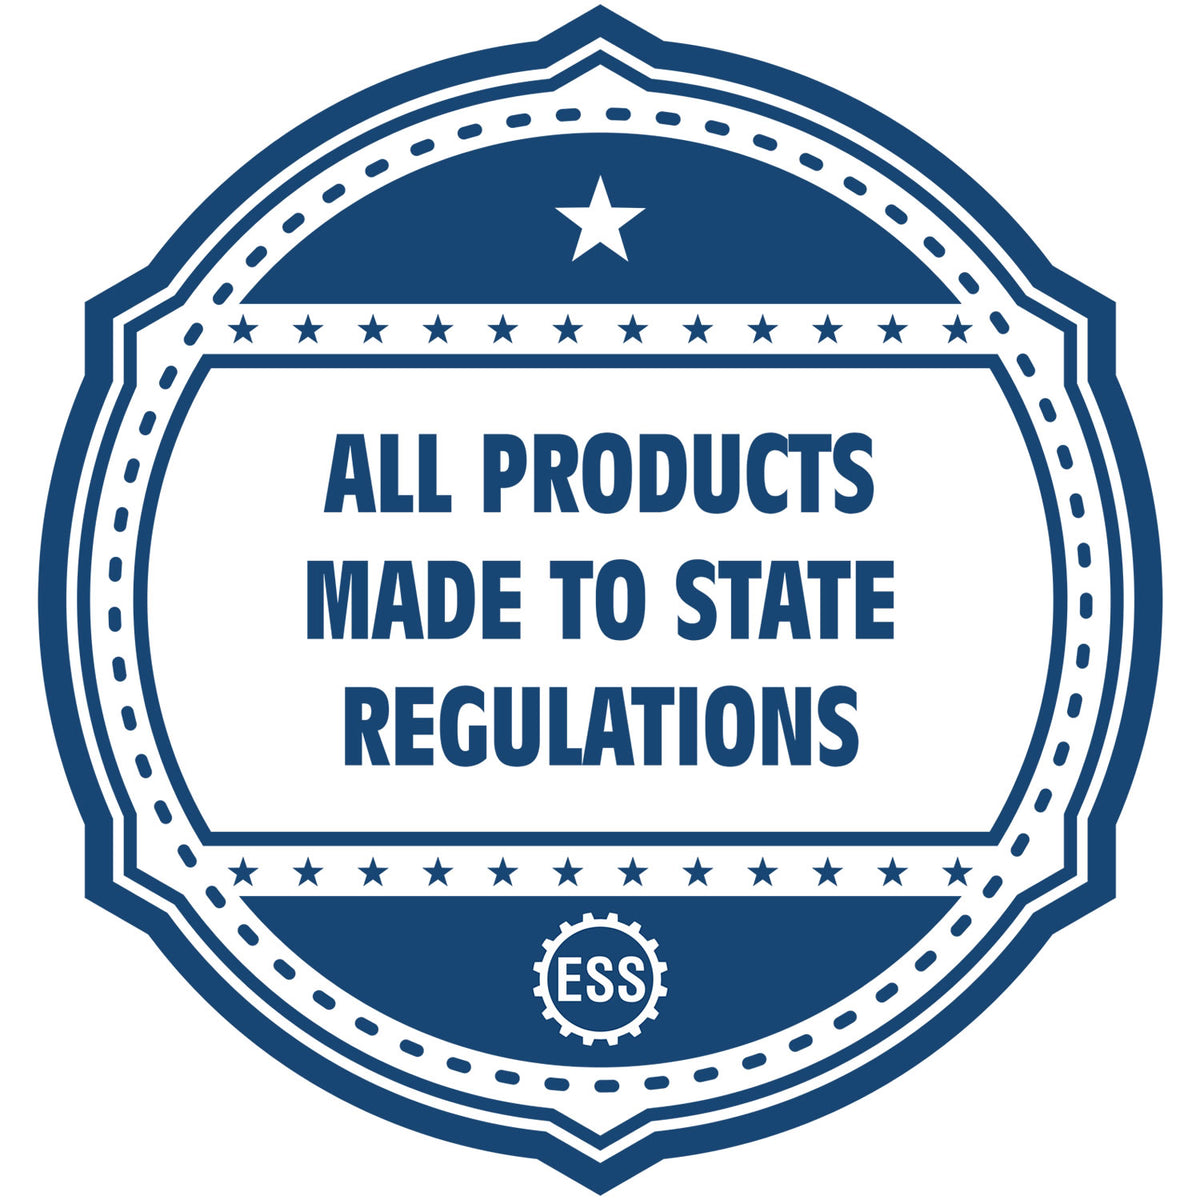 An icon or badge element for the Premium MaxLight Pre-Inked District of Columbia Landscape Architectural Stamp showing that this product is made in compliance with state regulations.